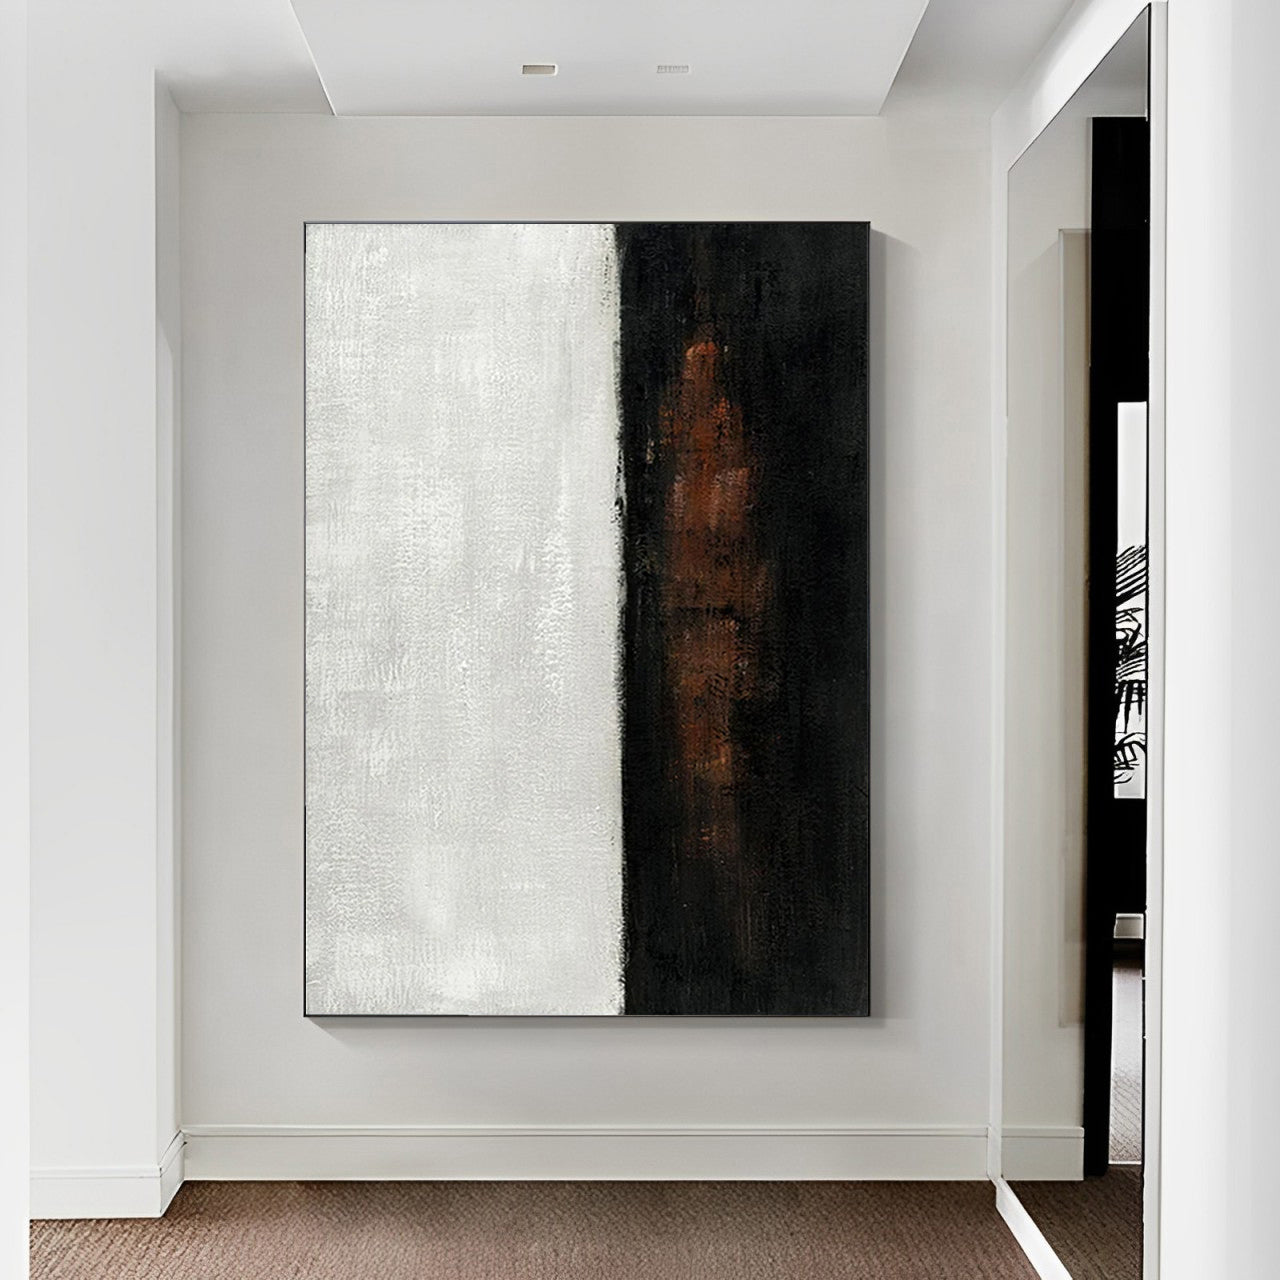 Meagre - Large Minimal Red, White and Black Painting on Canvas